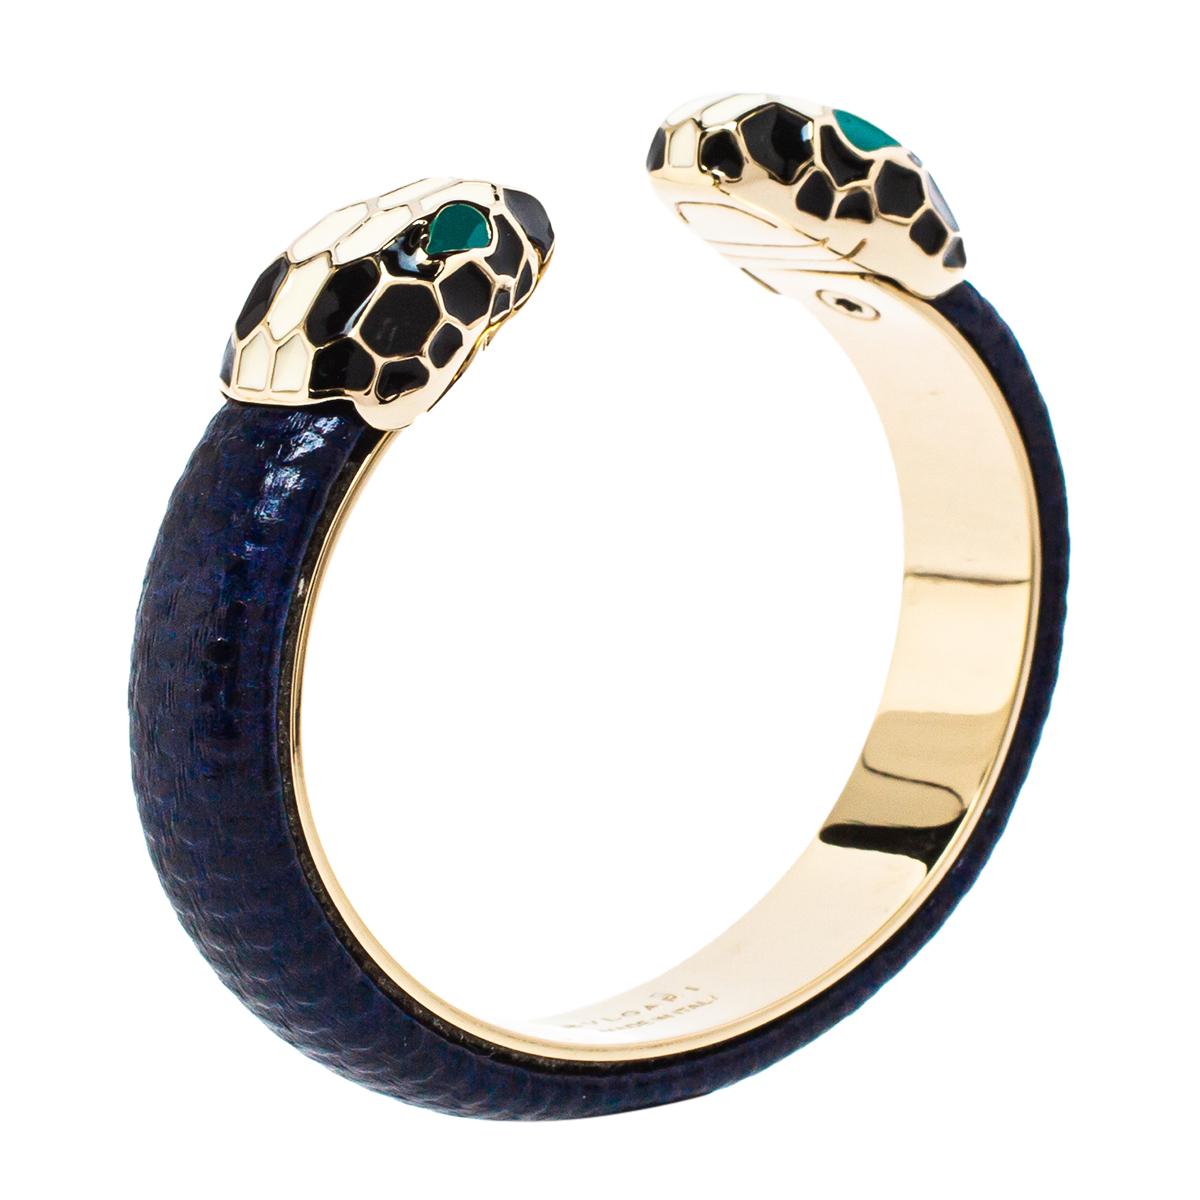 Bvlgari Serpenti Forever Bracelet (Black) | Rent Bvlgari jewelry for  $55/month - Join Switch